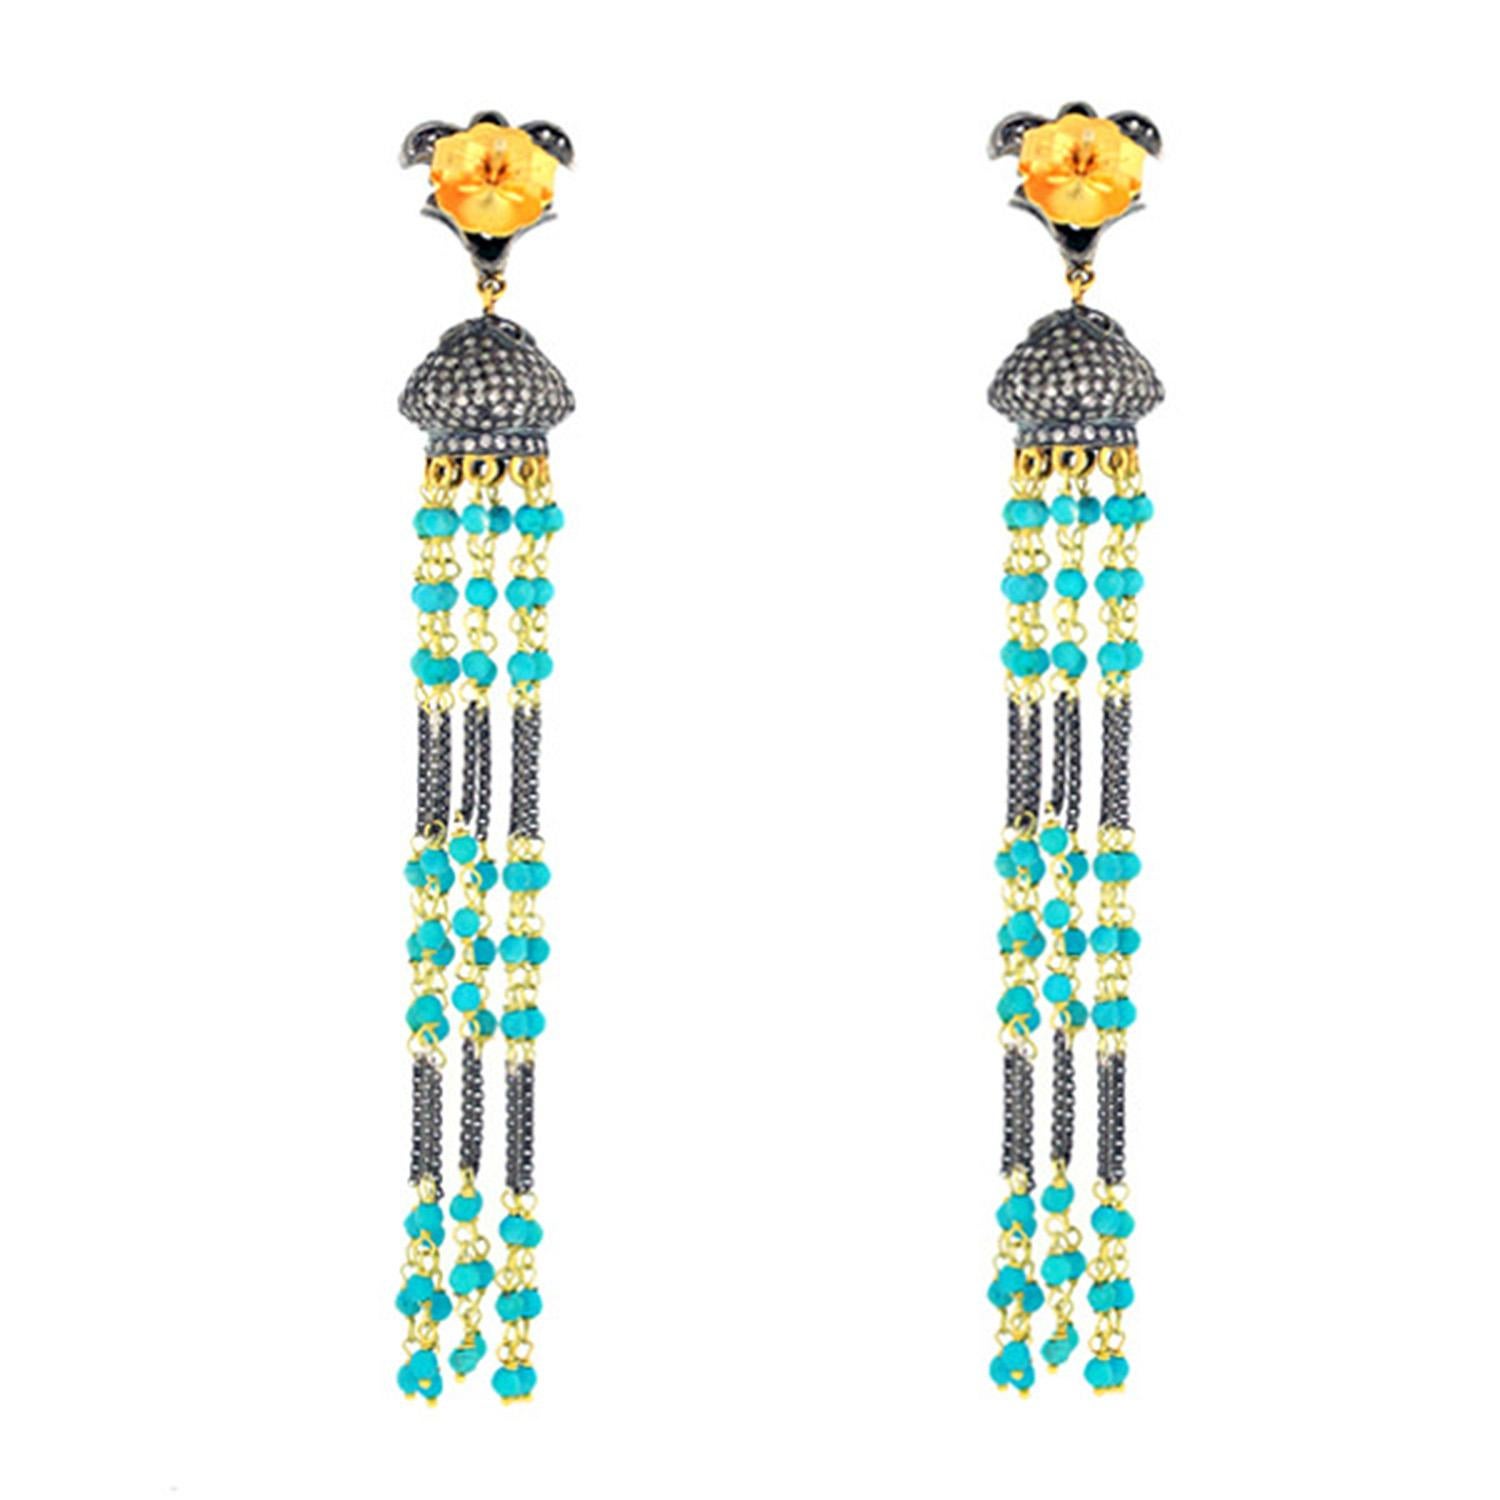 These tassel earrings are handmade in 18-karat gold & sterling silver. It is set in 9.68 carats turquoise and 2.52 carats of diamonds in blackened finish. 

FOLLOW  MEGHNA JEWELS storefront to view the latest collection & exclusive pieces.  Meghna